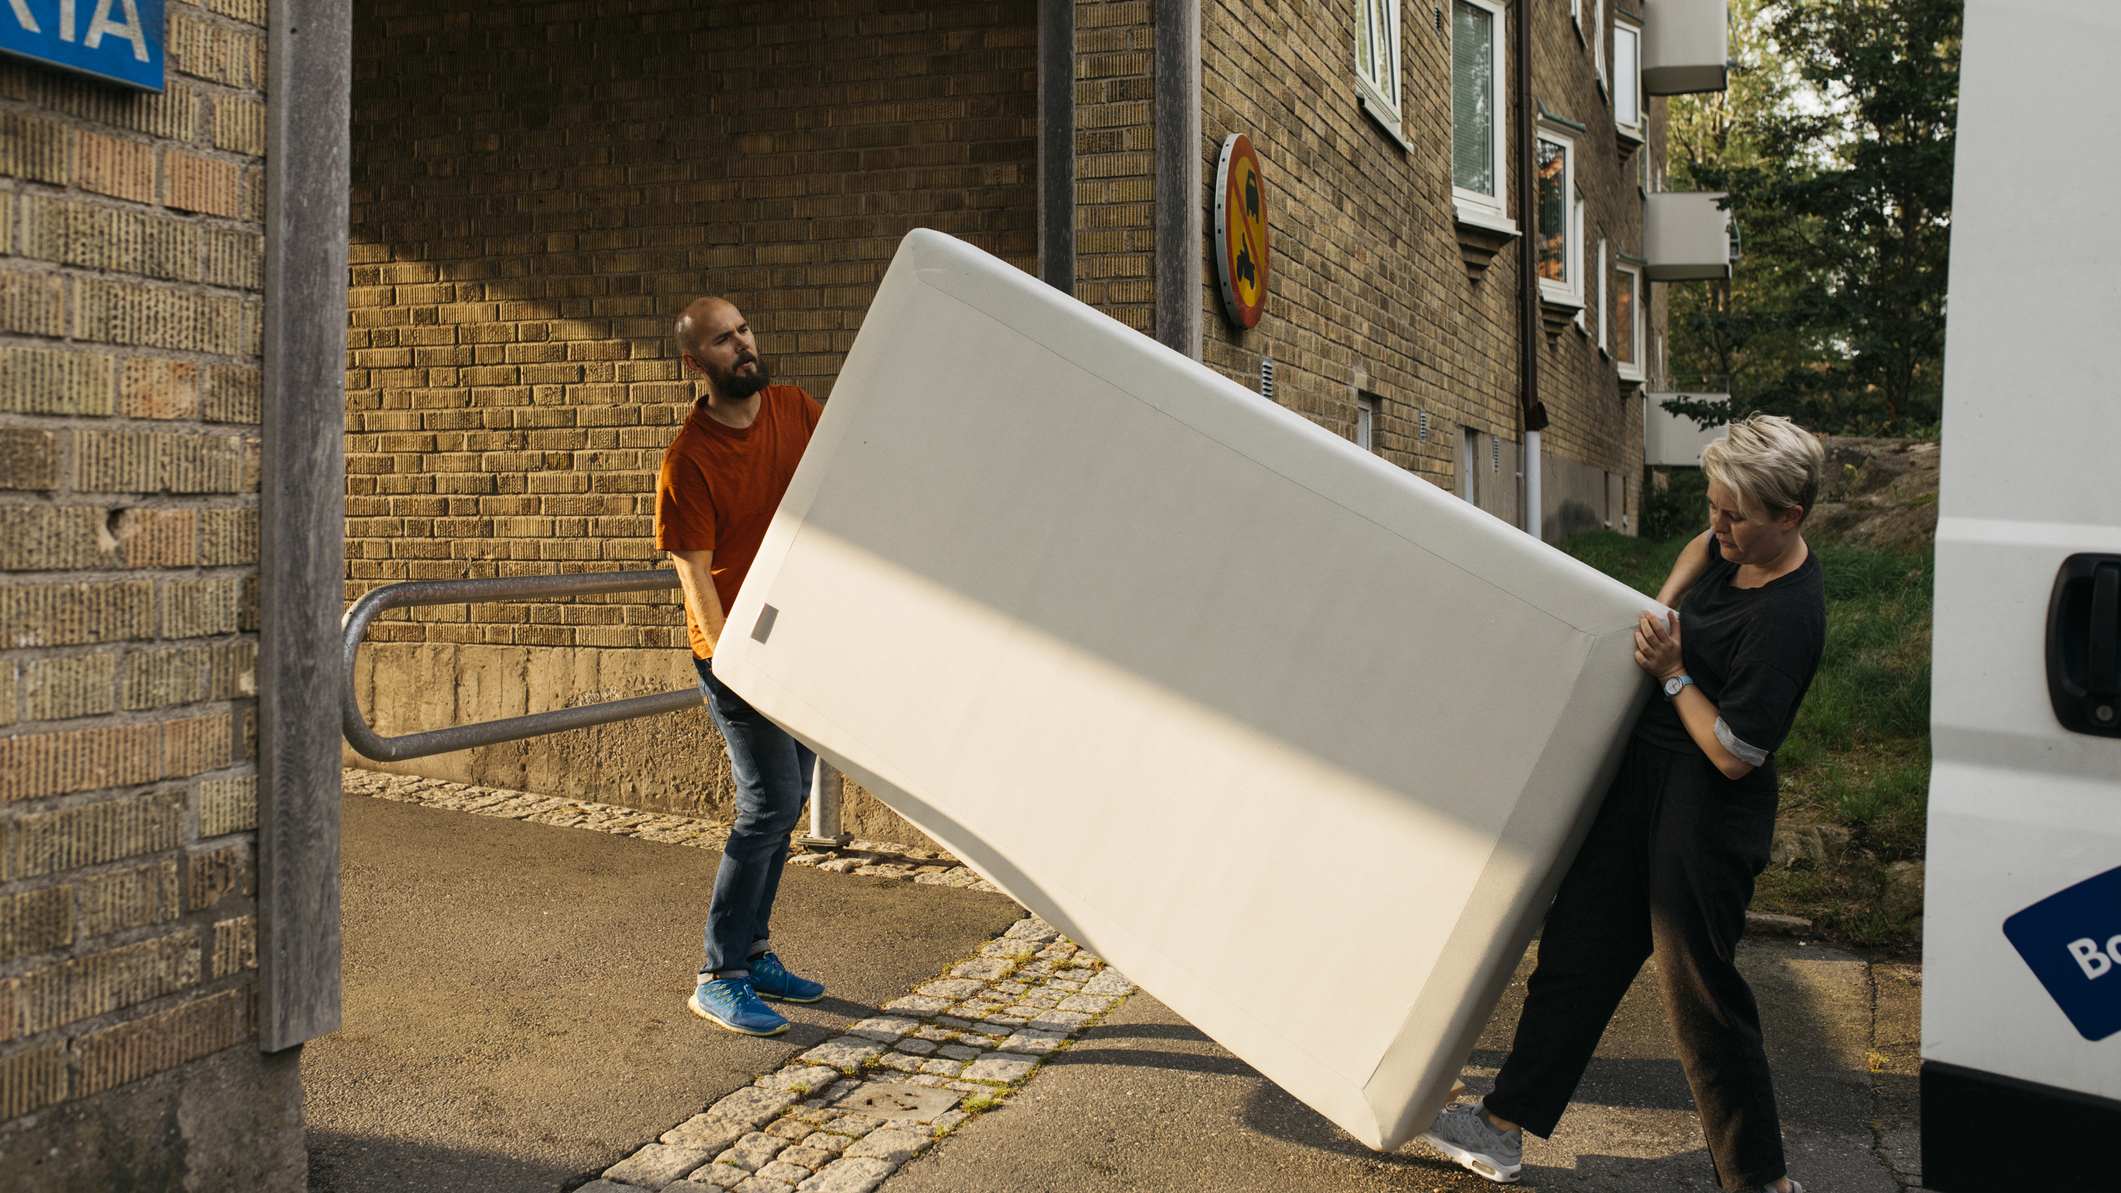 How to dispose of a mattress: A guide to mattress donation and mattress recycling | Top Ten Reviews